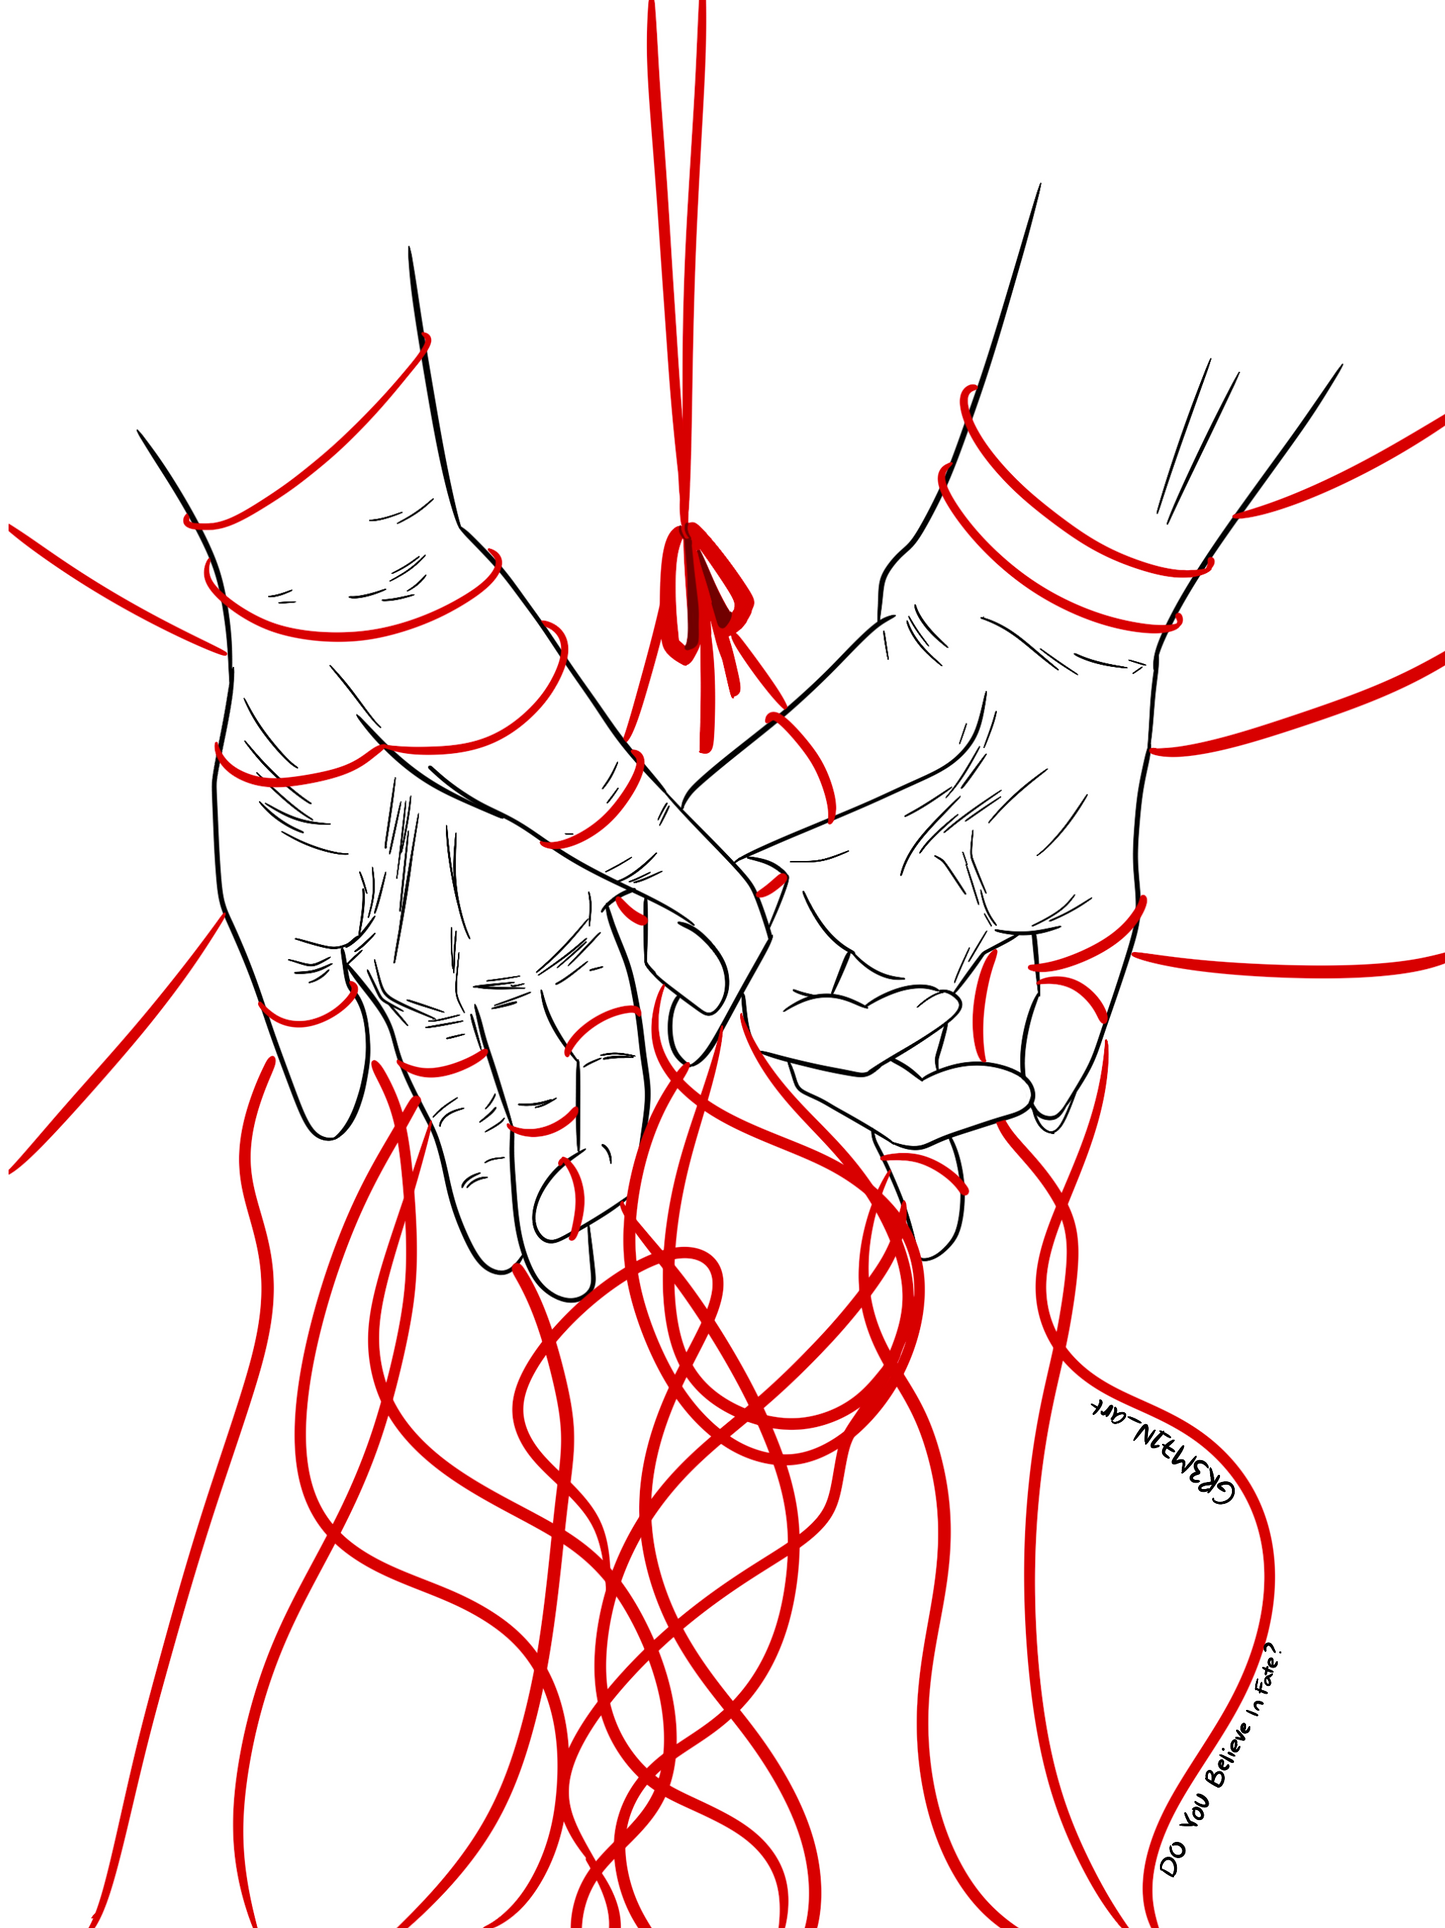 Red String of Fate Mini Prints